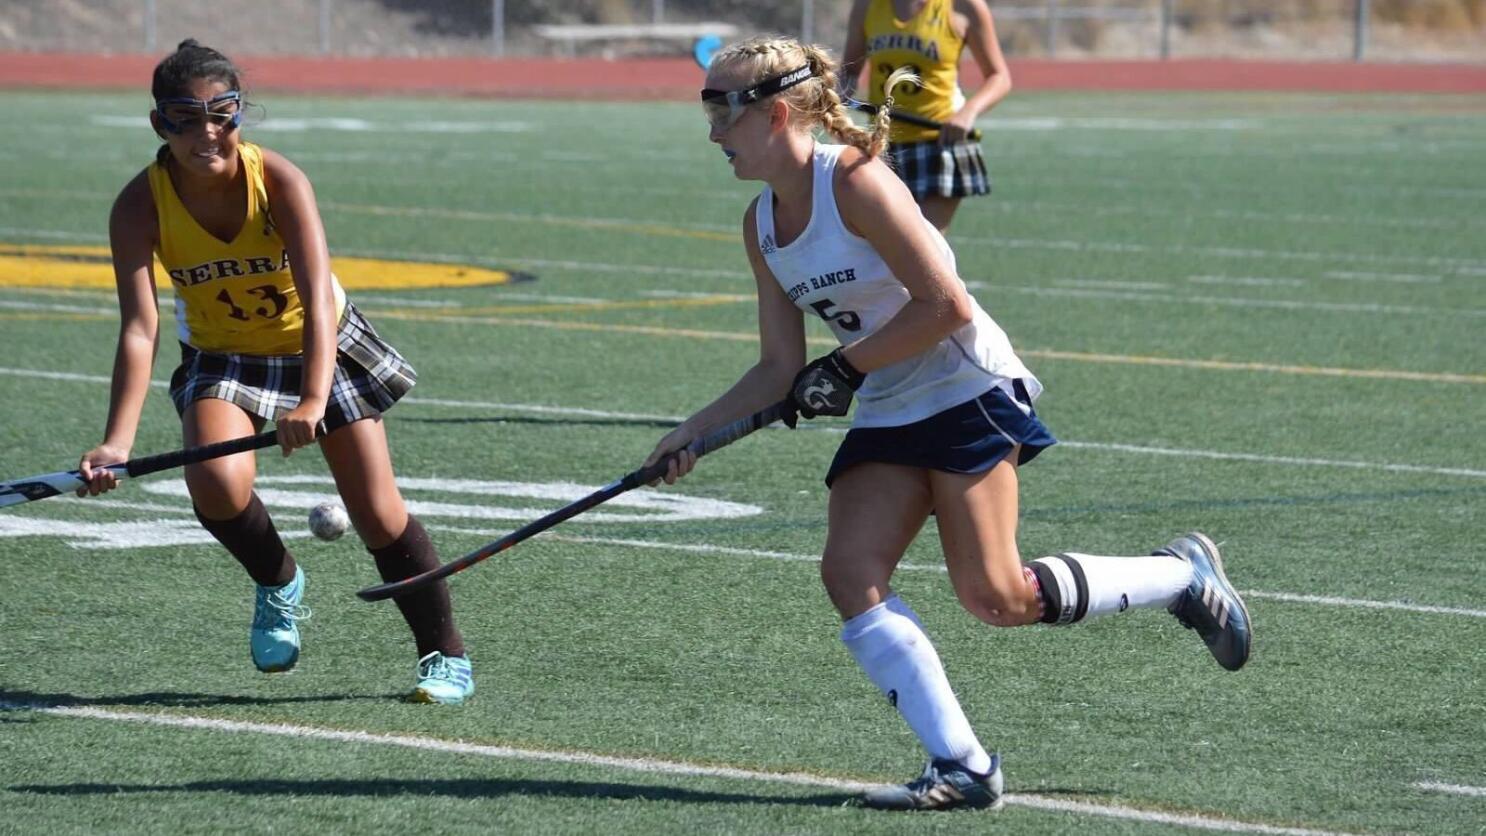 Eastlake girls field hockey team claims undefeated league championship